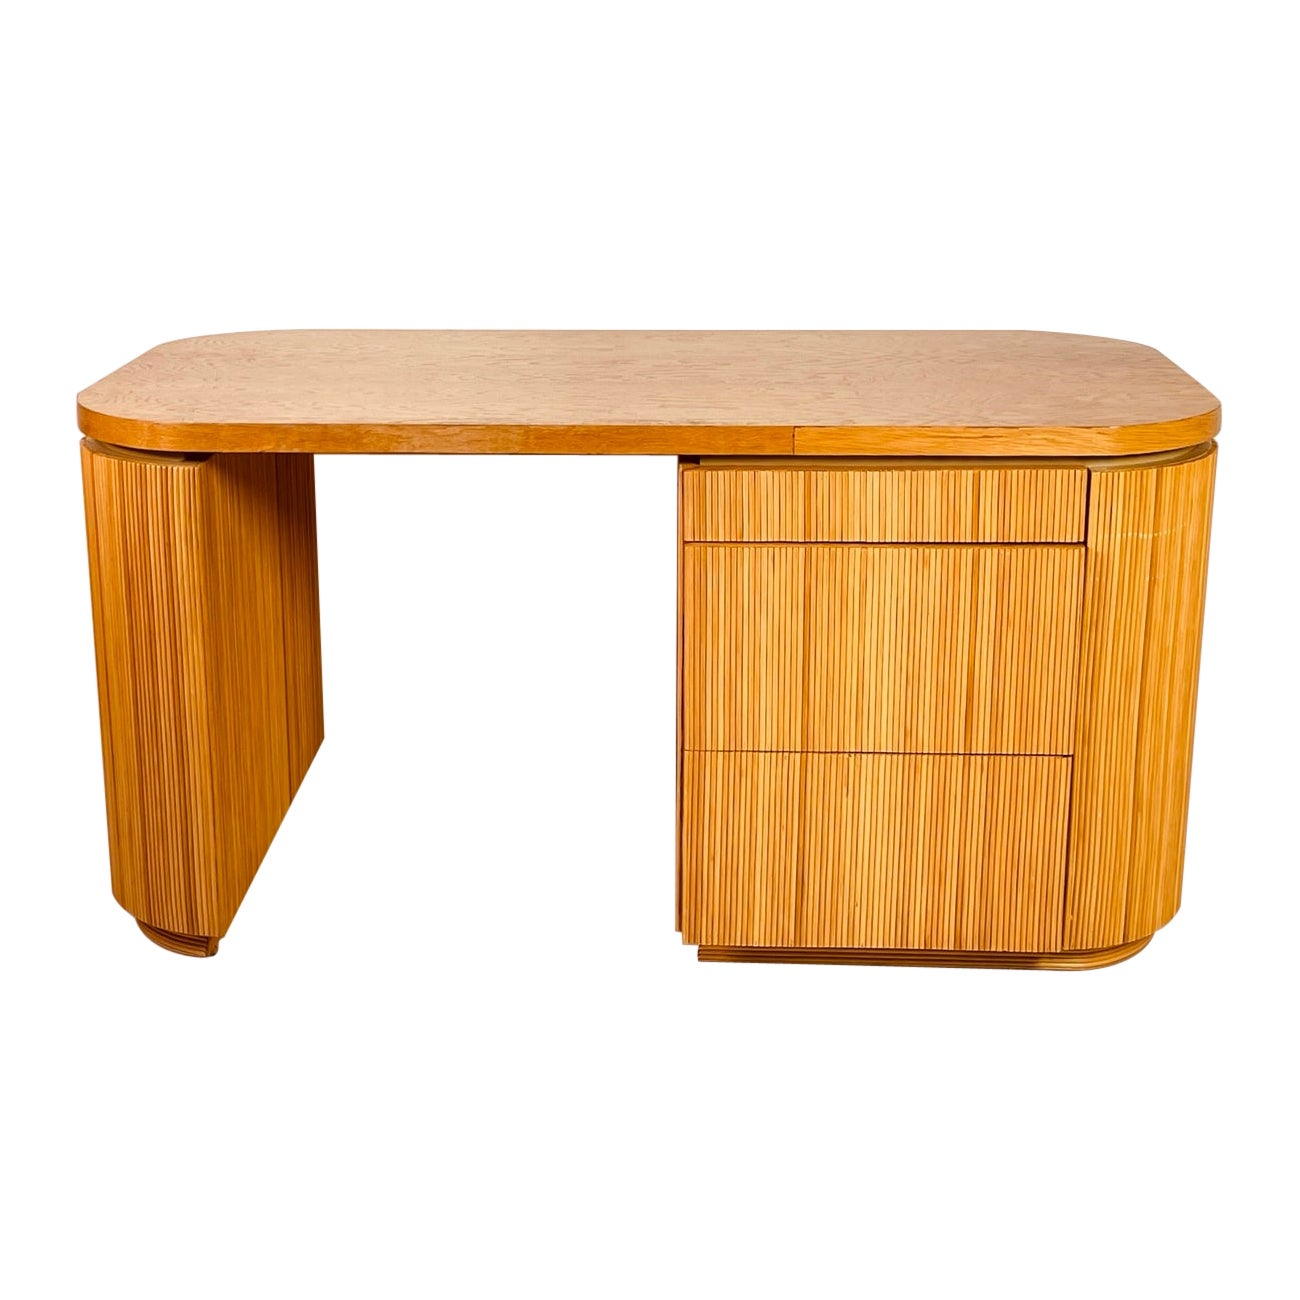 Pencil Reed Executive Desk in the Style of Karl Springer, USA 1970's For Sale